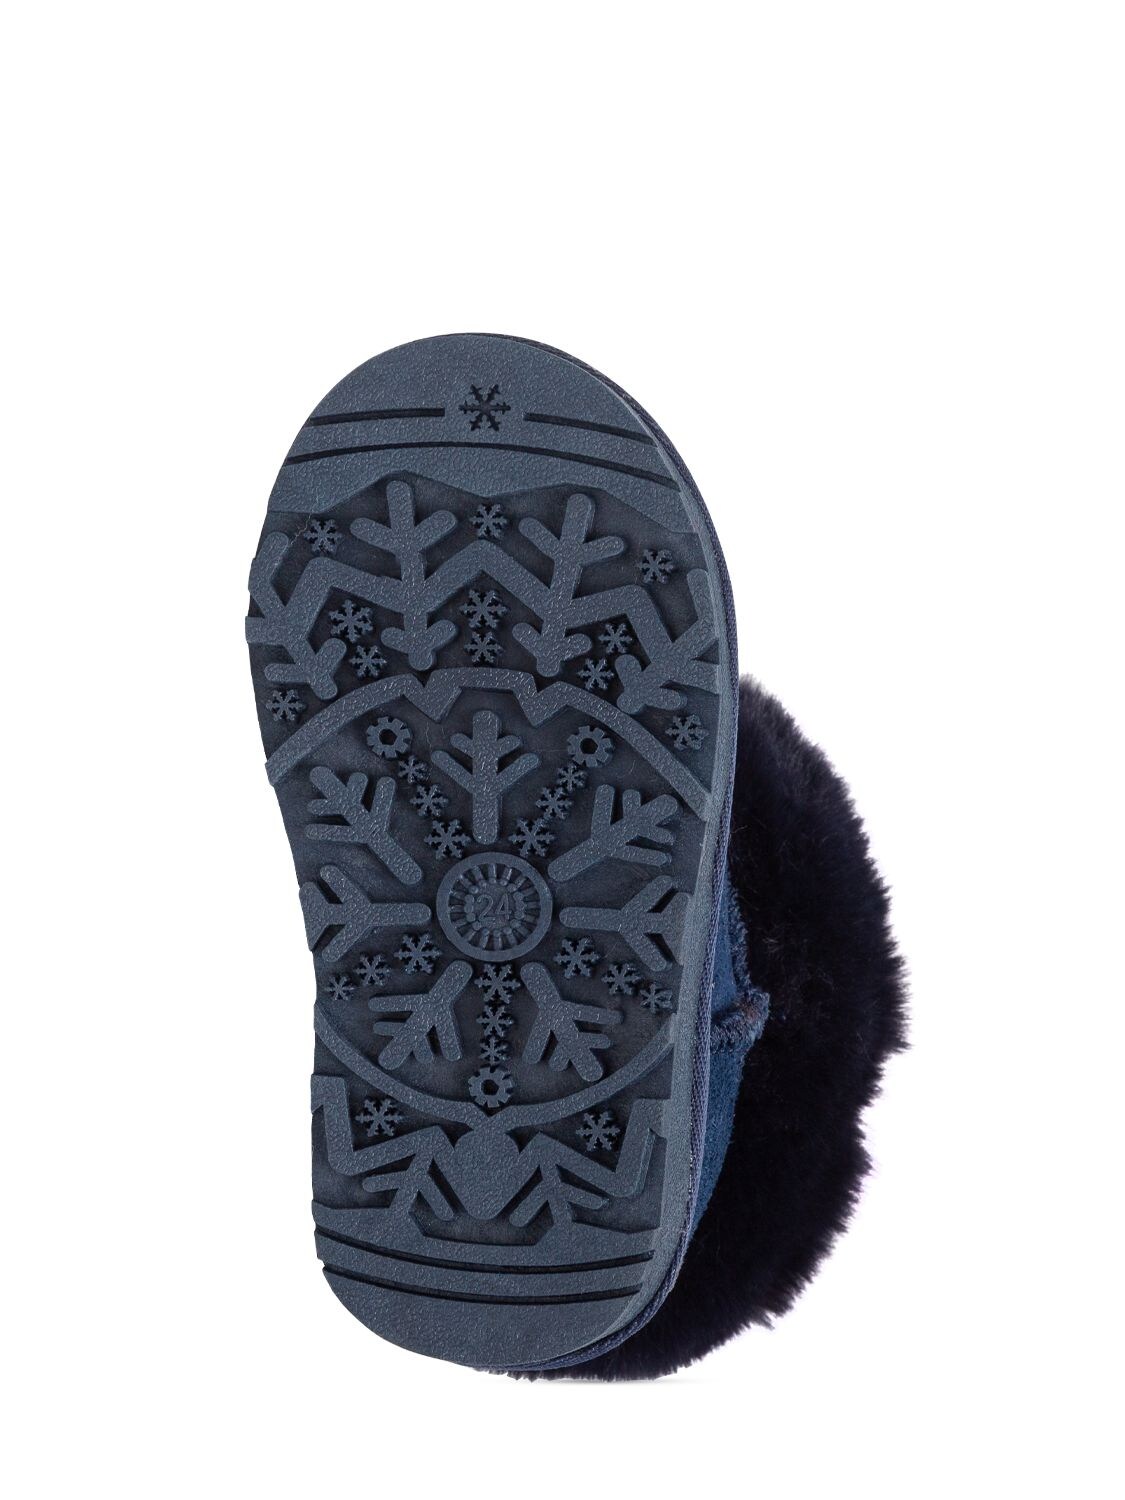 Shop Monnalisa Embellished Leather & Faux Fur Boots In Navy